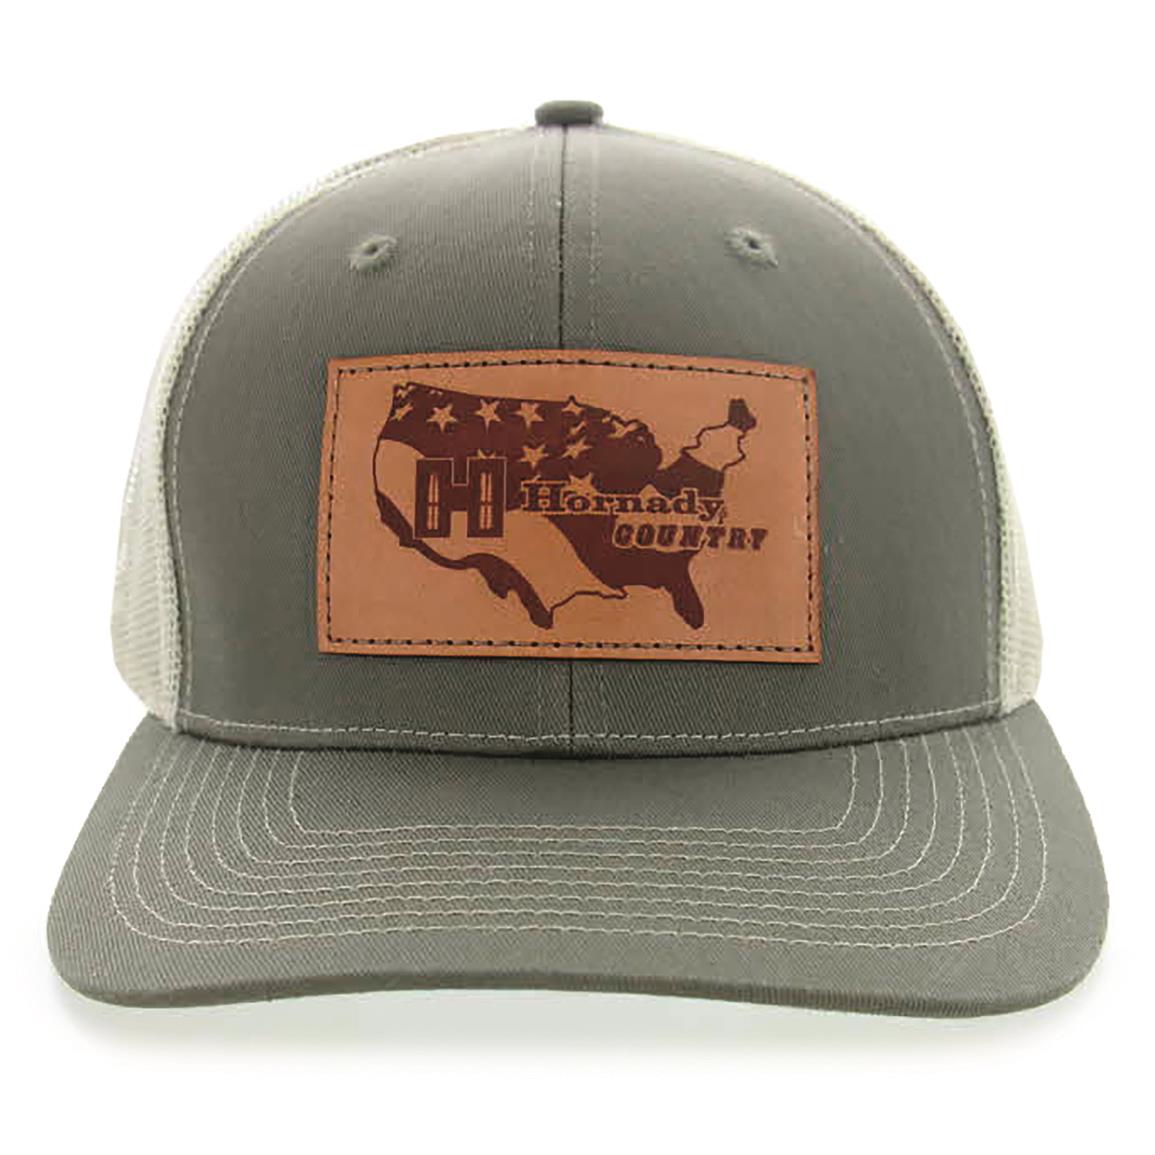 Hornady Men's Country Logo Trucker Cap, Leather Patch Logo, Olive/Tan